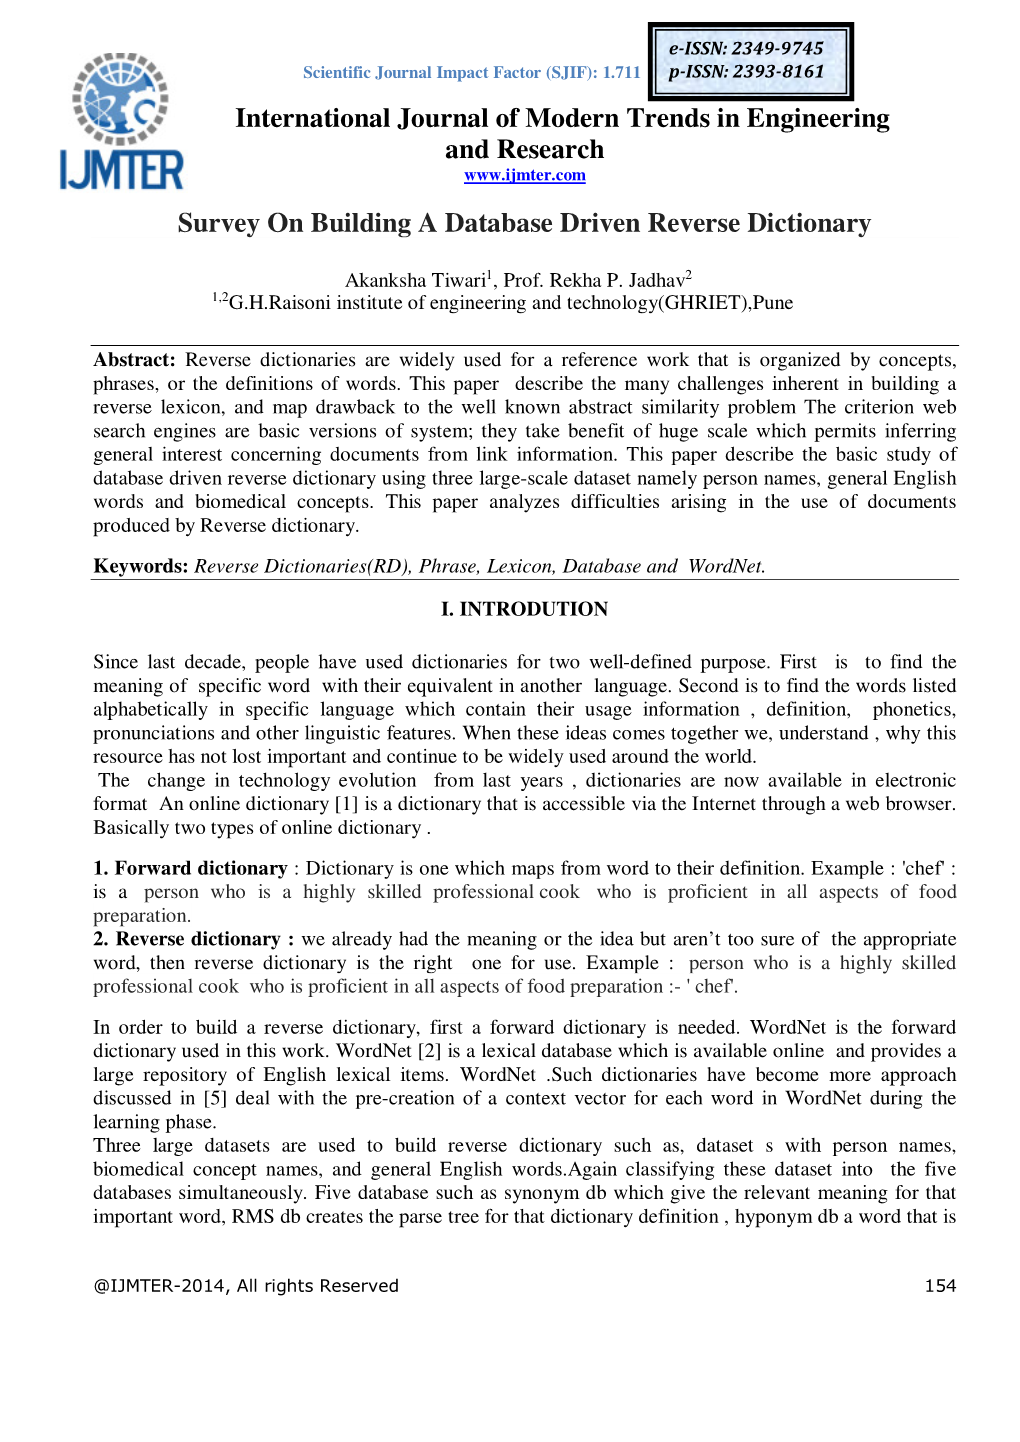 Survey on Building a Database Driven Reverse Dictionary